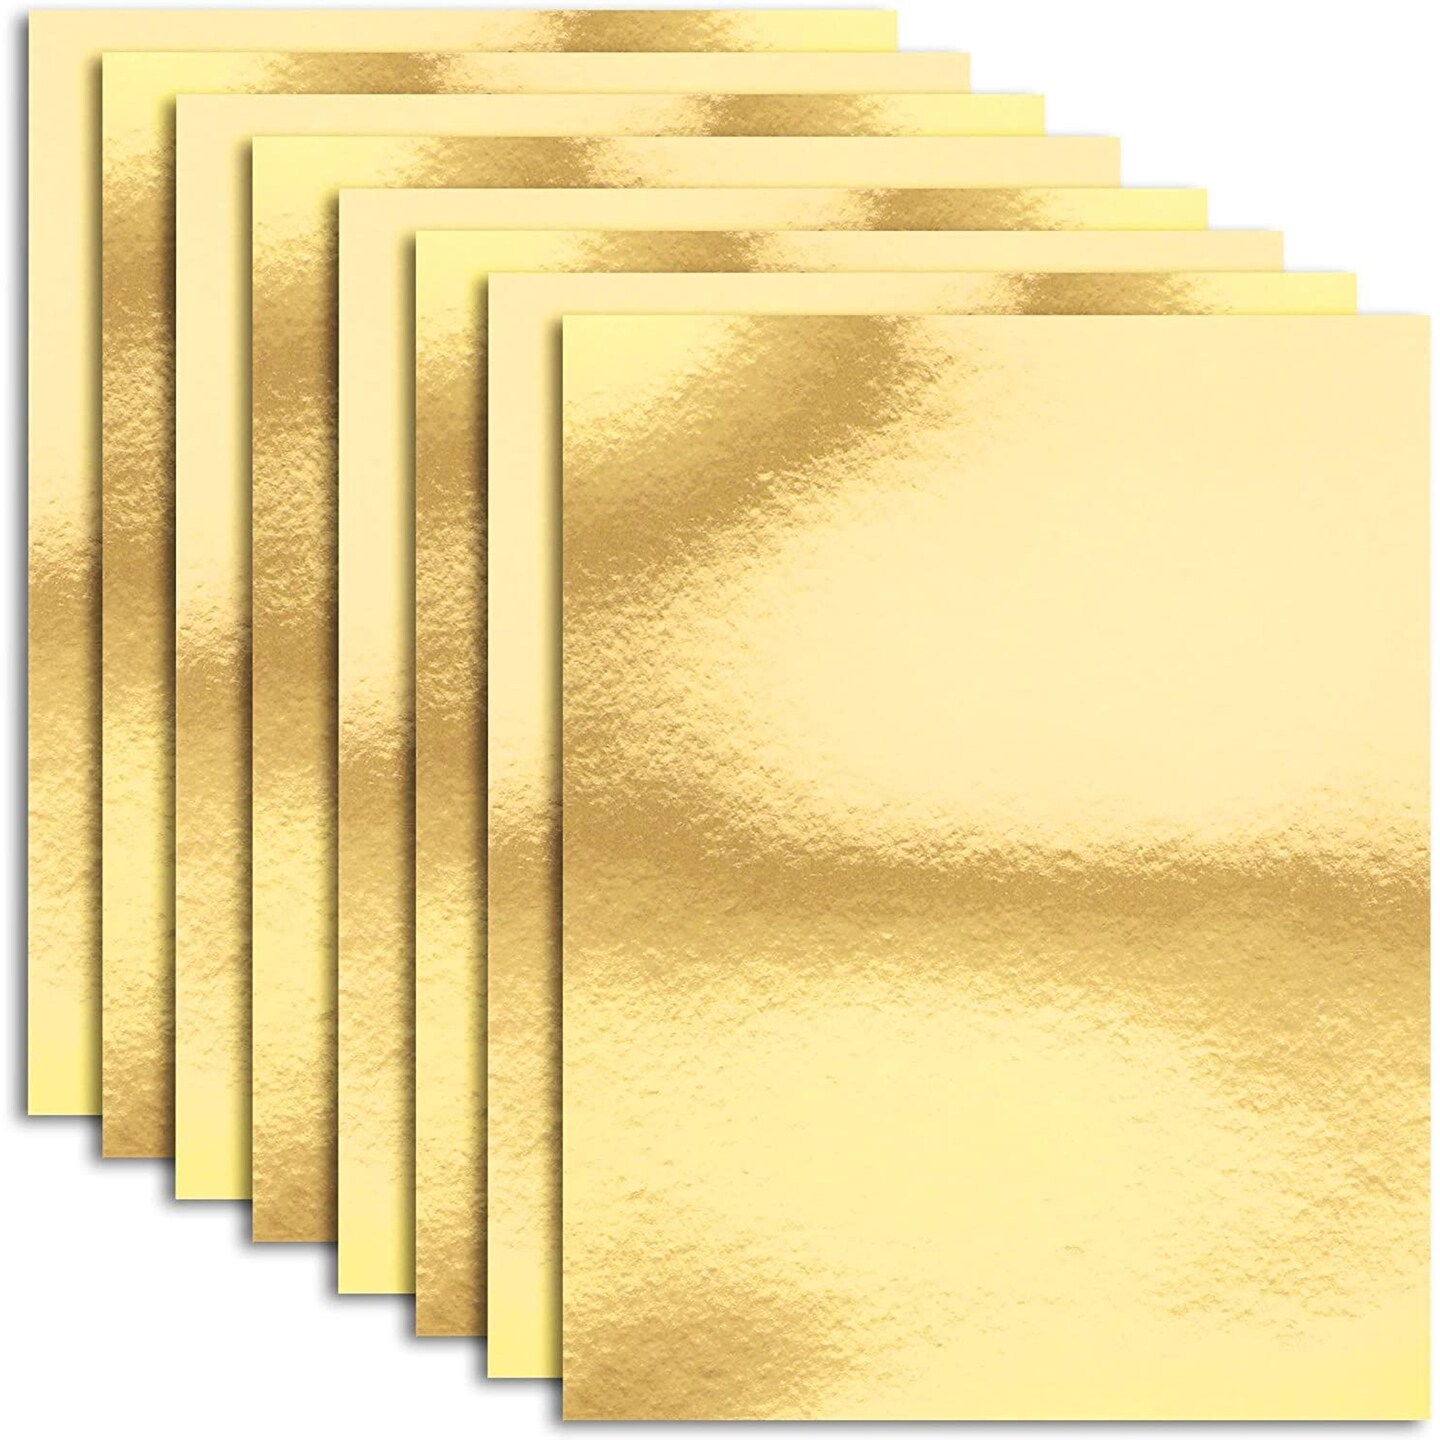 Metallic Cardboard Sheets in Gold Foil for Arts &#x26; Crafts Supplies (Letter Size, 50-Pack)